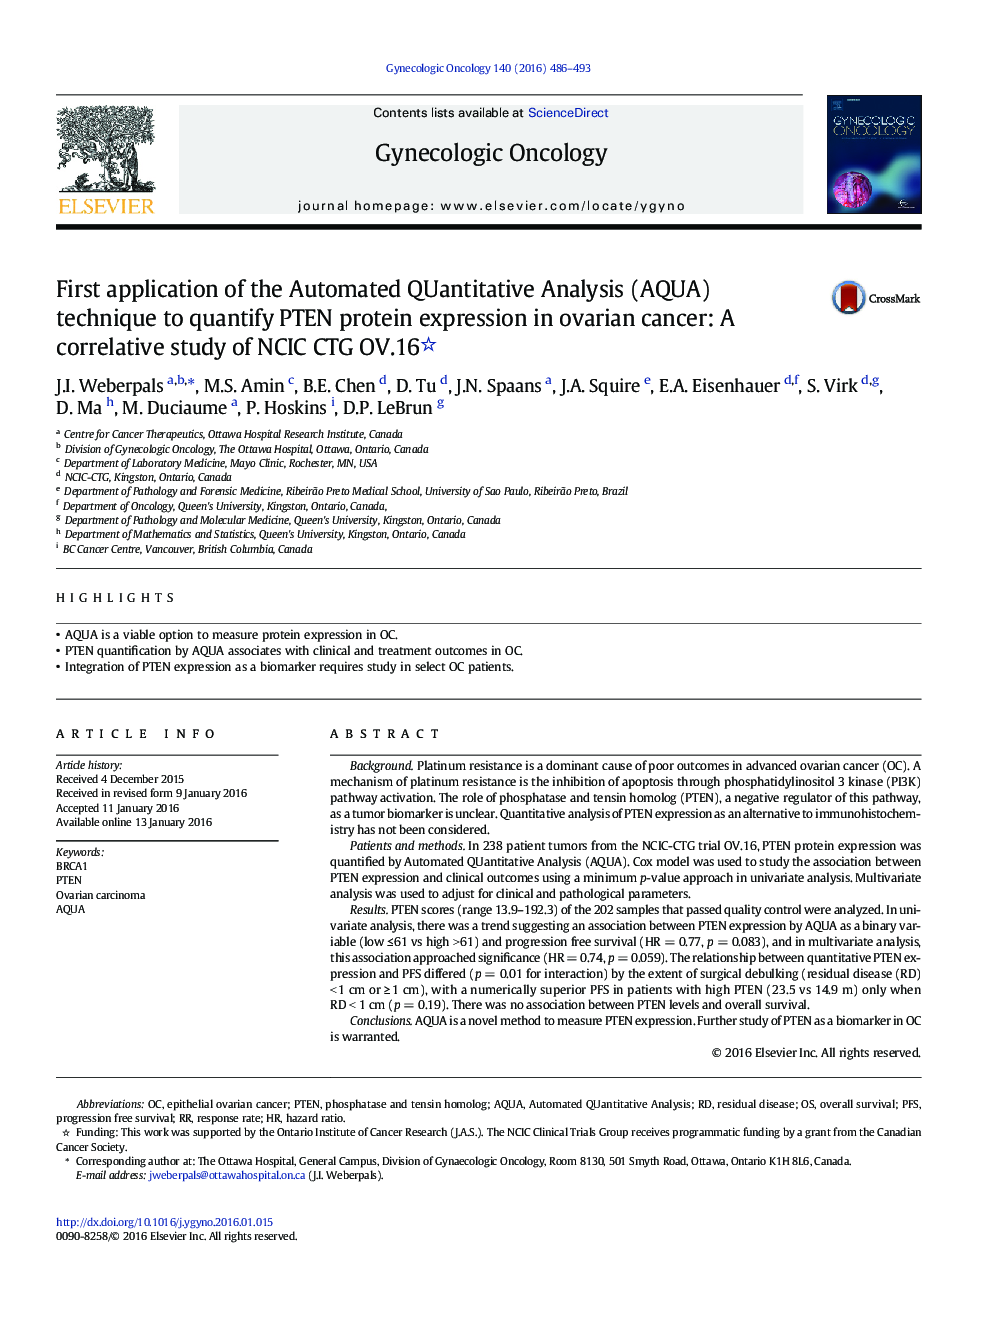 First application of the Automated QUantitative Analysis (AQUA) technique to quantify PTEN protein expression in ovarian cancer: A correlative study of NCIC CTG OV.16 